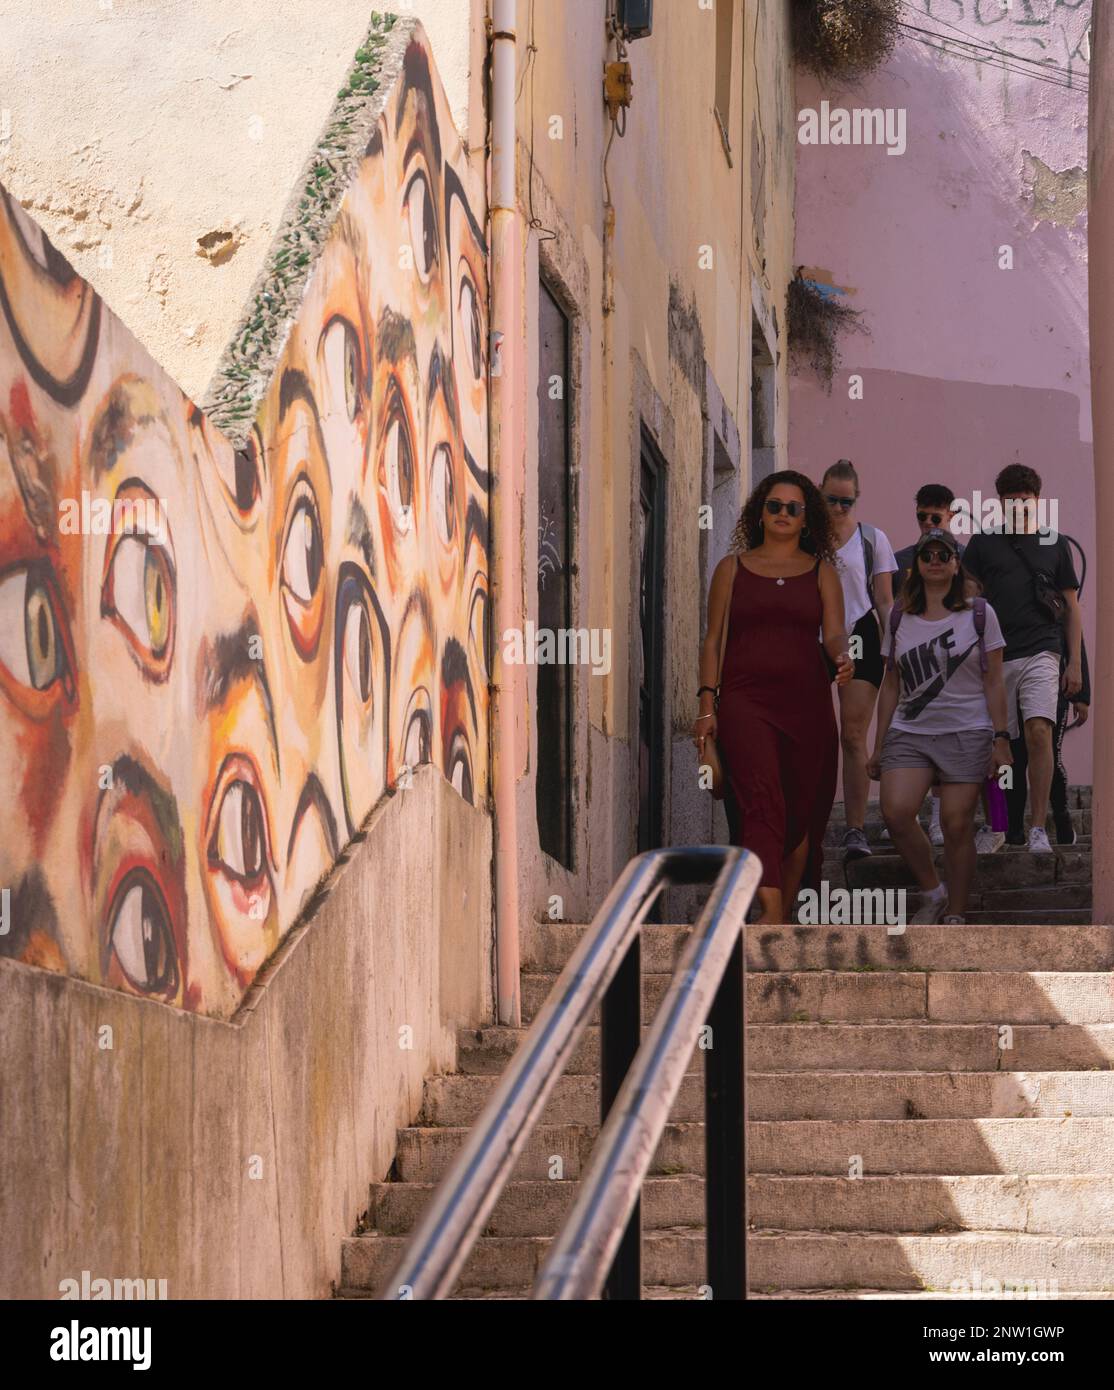 Lisbon, Portugal.  People descending steps in narrow alley.  Wall painted with graffiti of watching eyes. Stock Photo